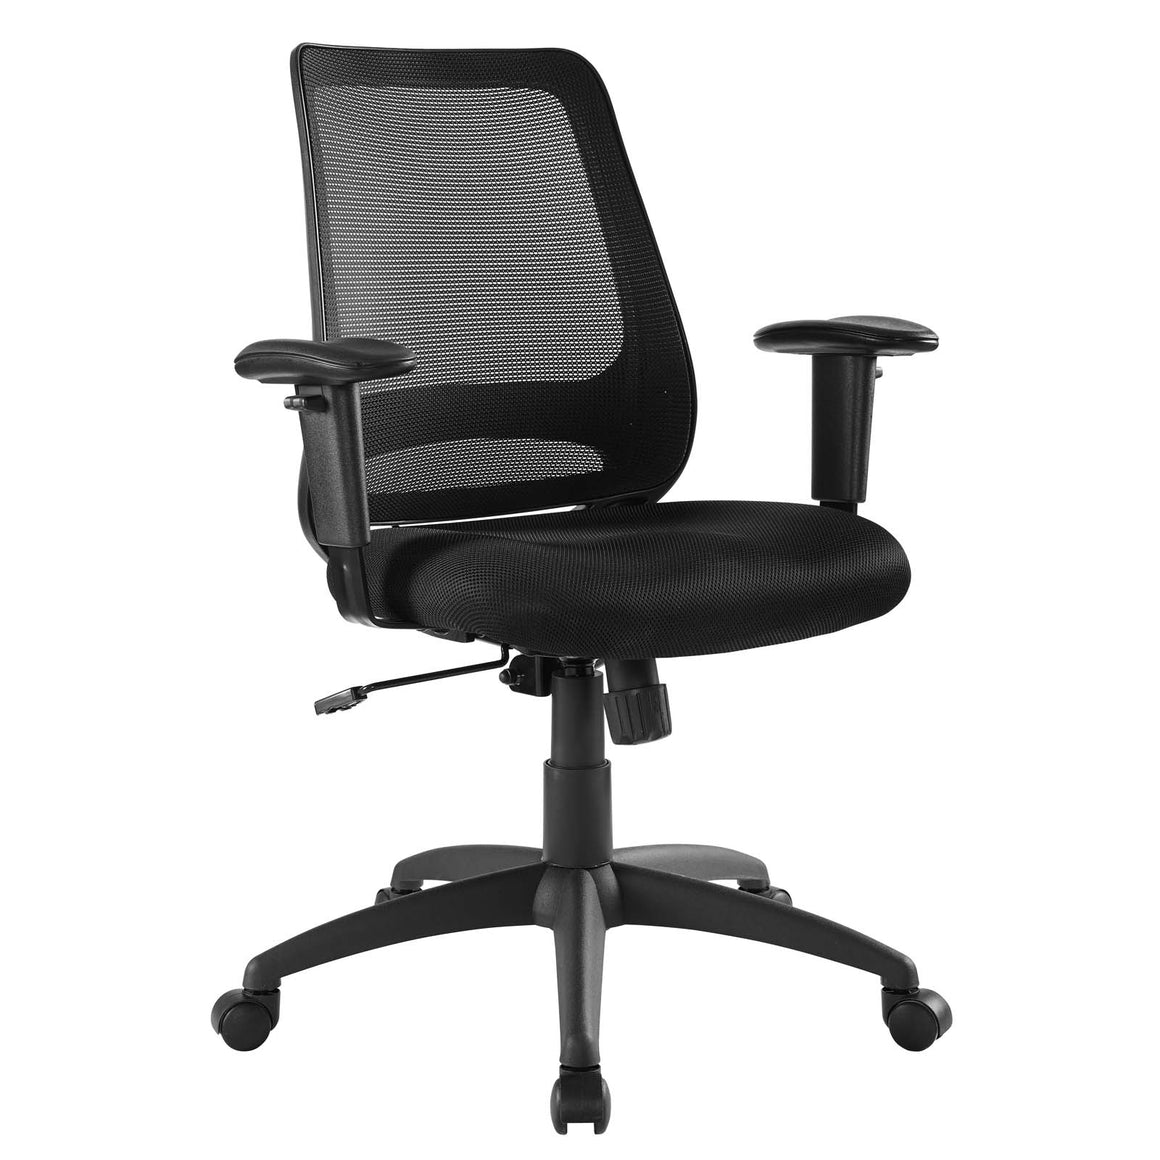 Forge Mesh Office Chair in Black